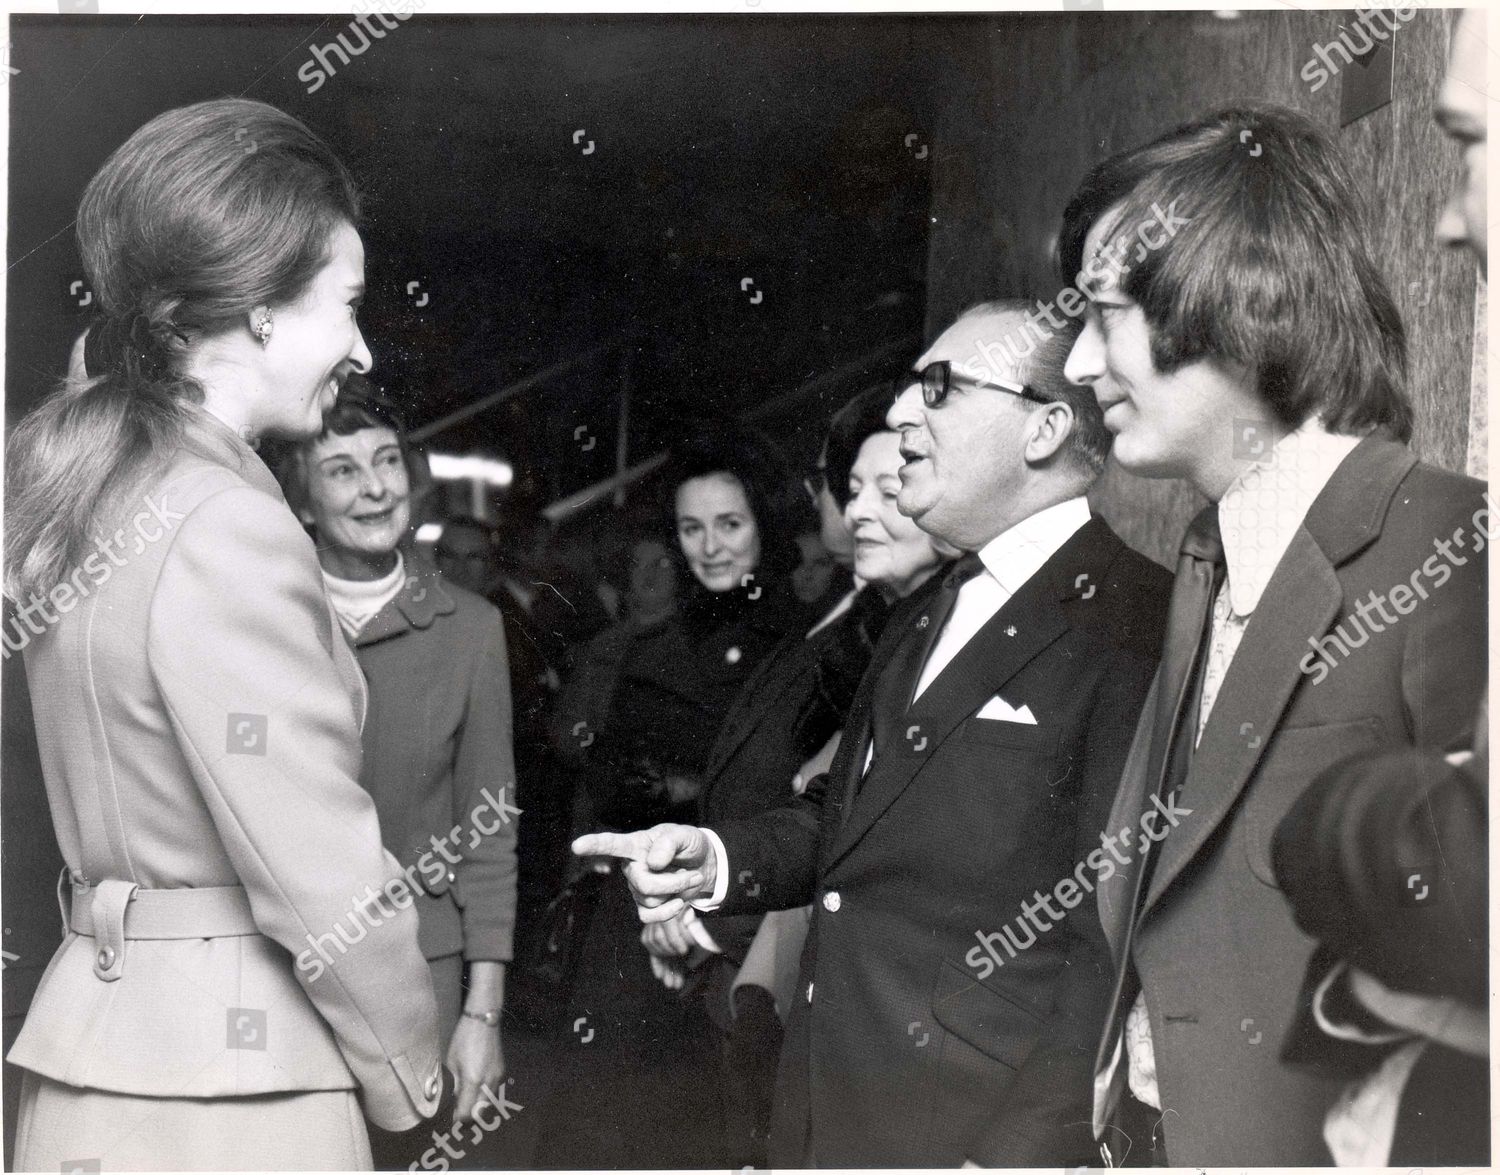 princess-anne-now-princess-royal-1971-picture-shows-princess-anne-shares-a-joke-with-comedian-charlie-chester-and-disc-jockey-tony-blackburn-when-she-met-him-at-an-art-exhibition-in-aid-of-save-the-children-fund-at-new-zealand-house-today-charli-shutterstock-editorial-892389a.jpg